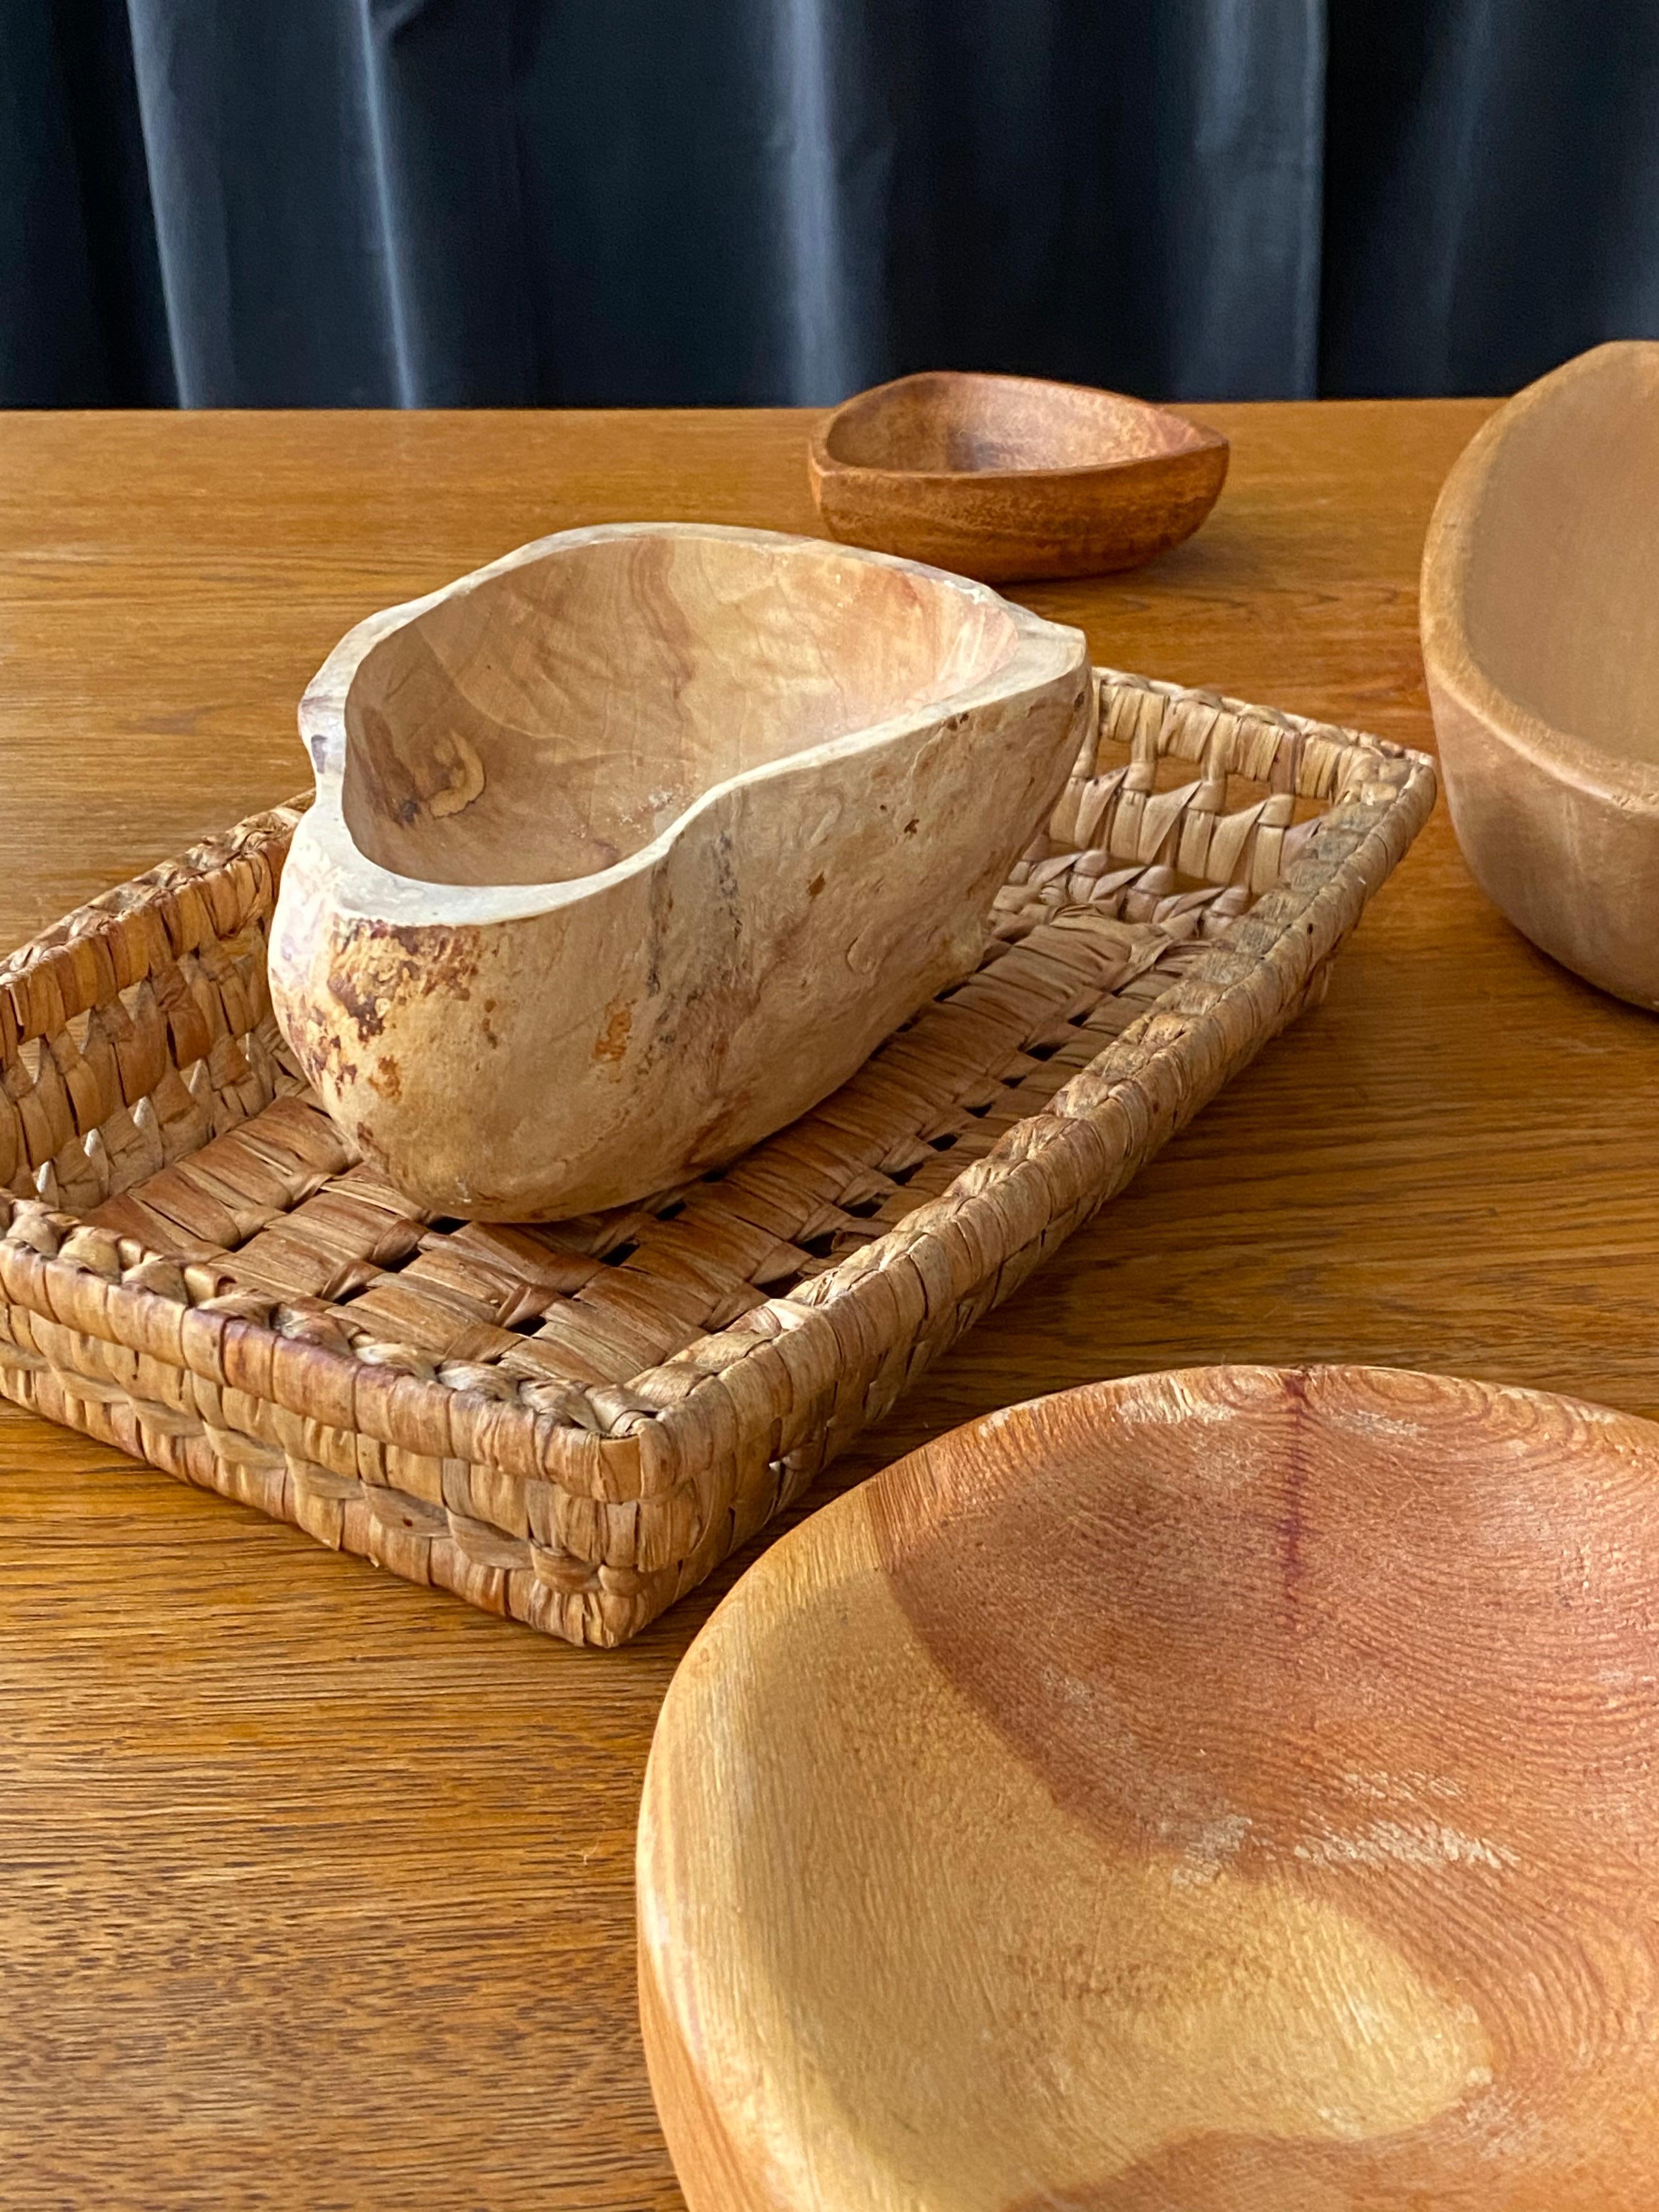 Swedish, Collection of Bowls, Dishes, Trays, Wood, Rope, Rattan, Midcentury 2